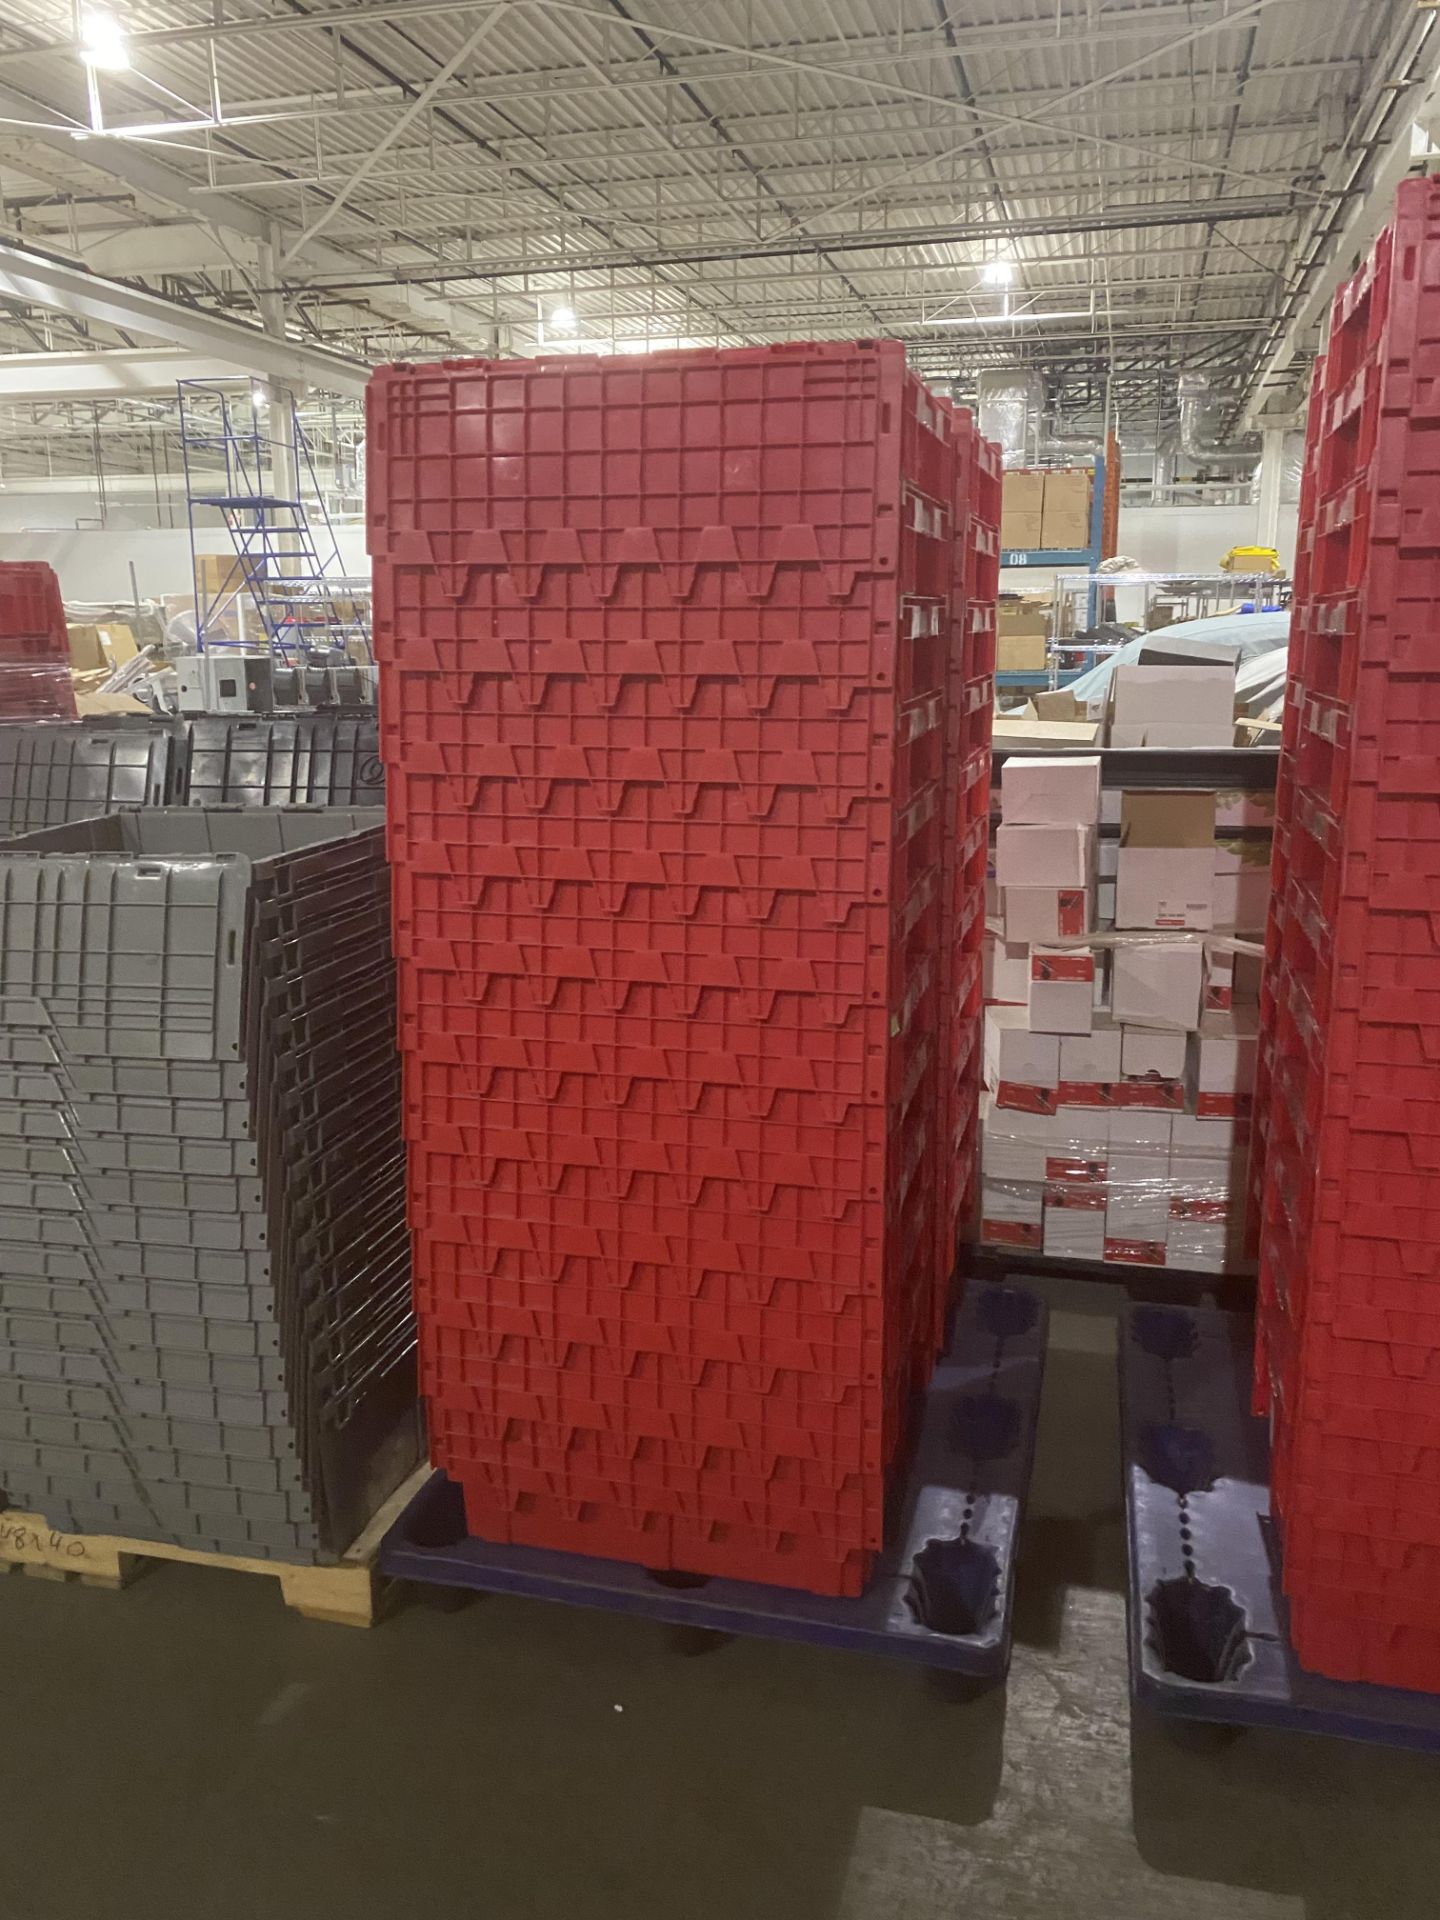 Lot of (200) Red Totes, (500) Bungee Cables, and Lockers - Image 2 of 4